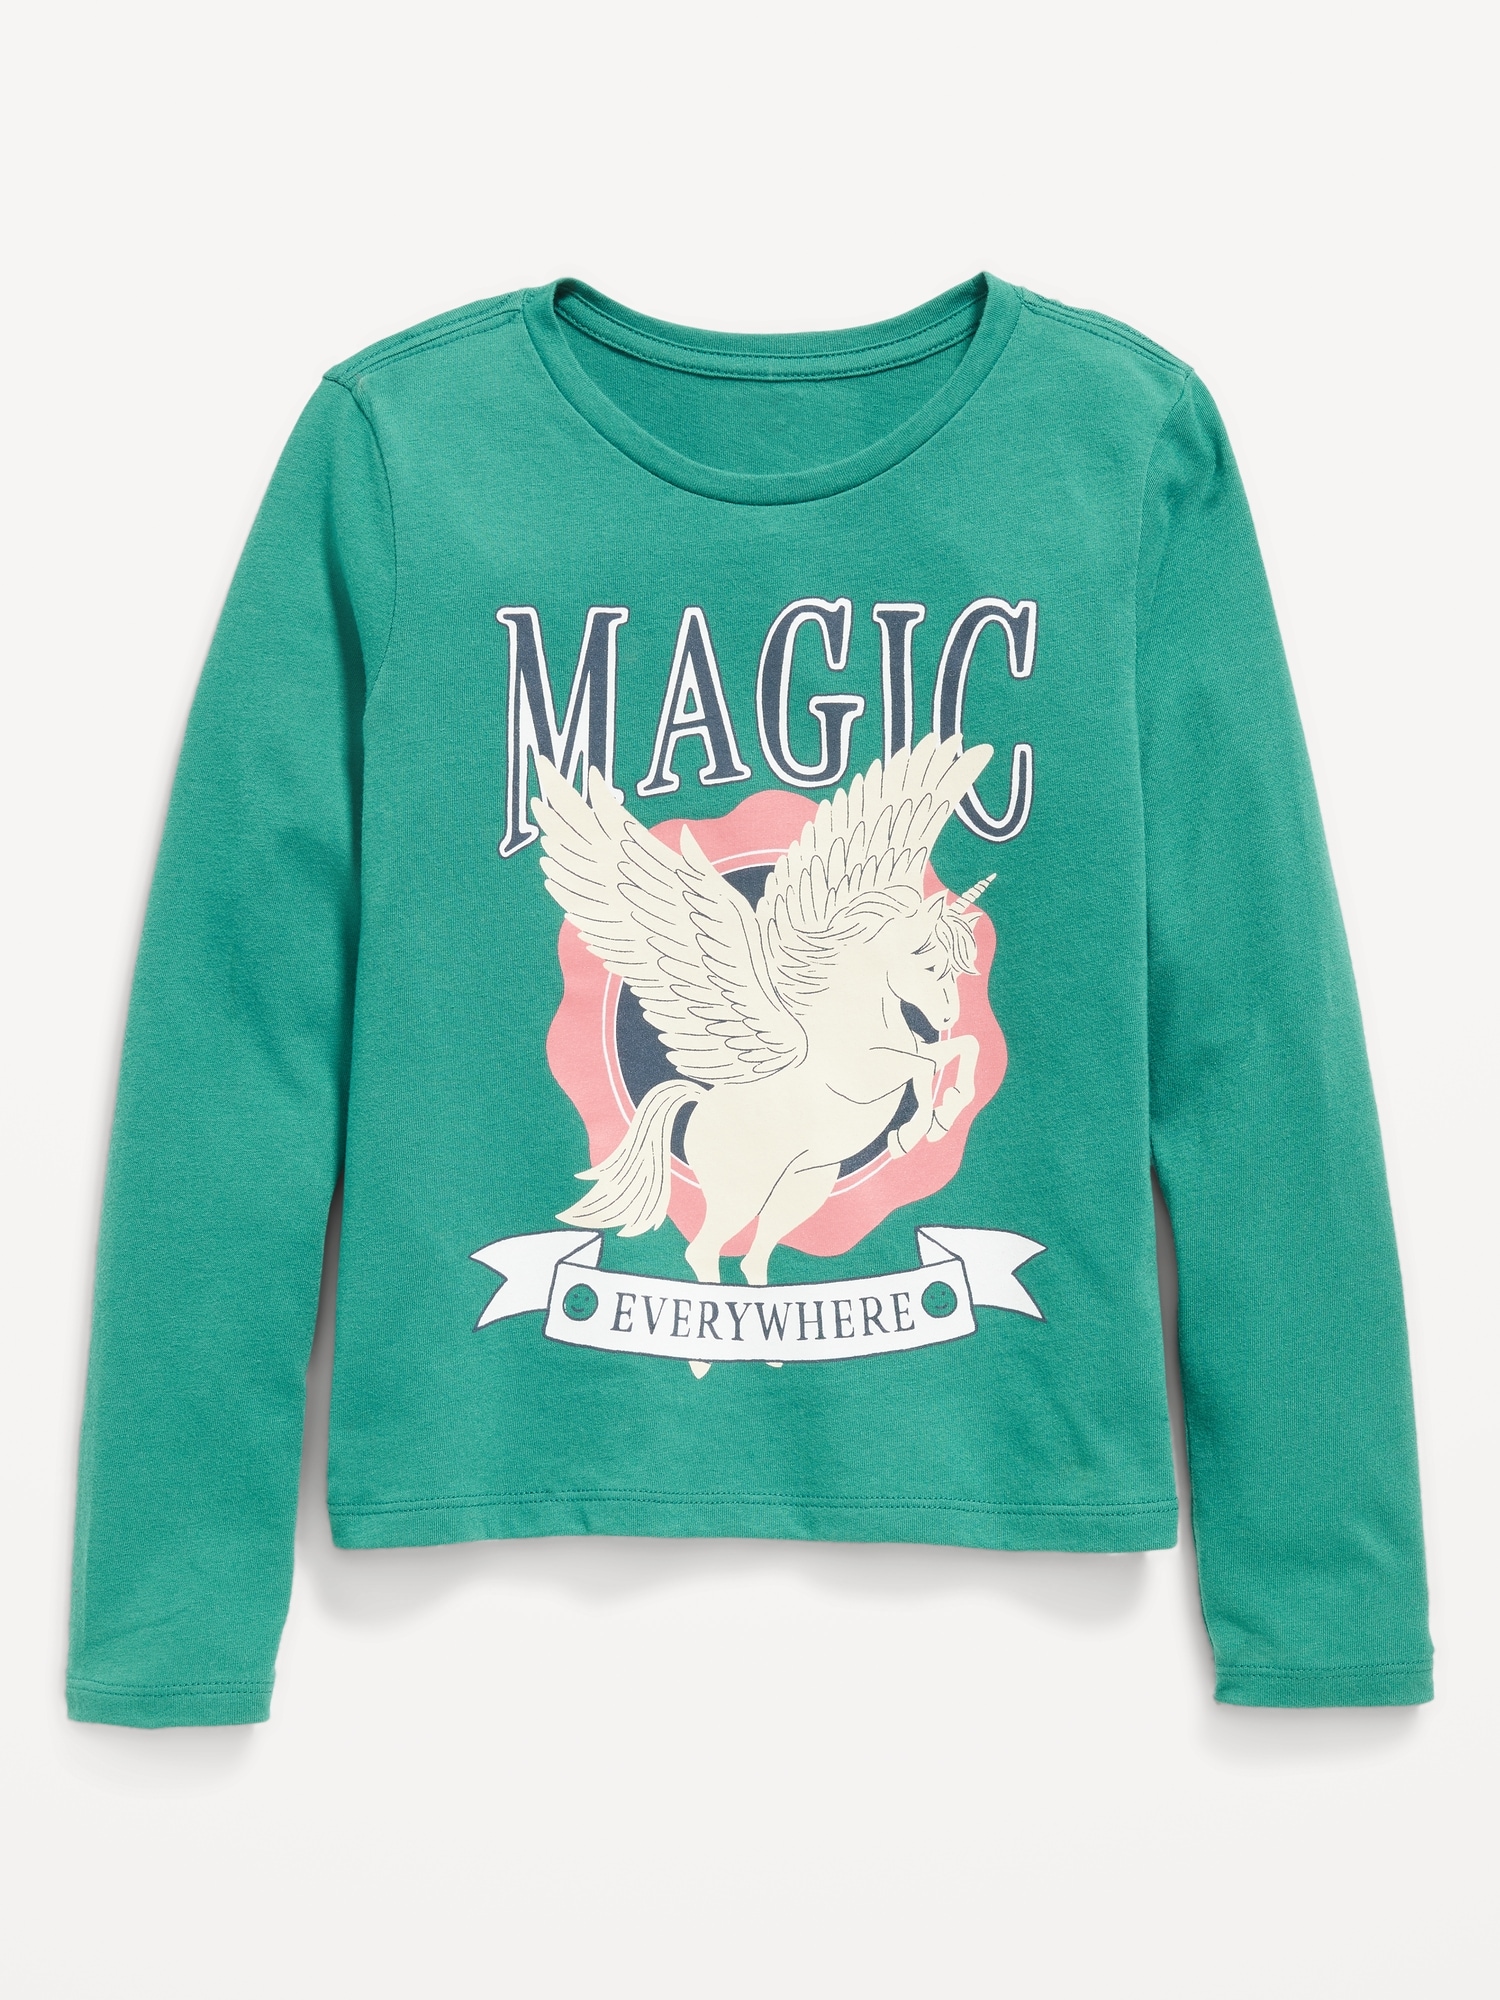 Long-Sleeve Graphic T-Shirt for Girls | Old Navy